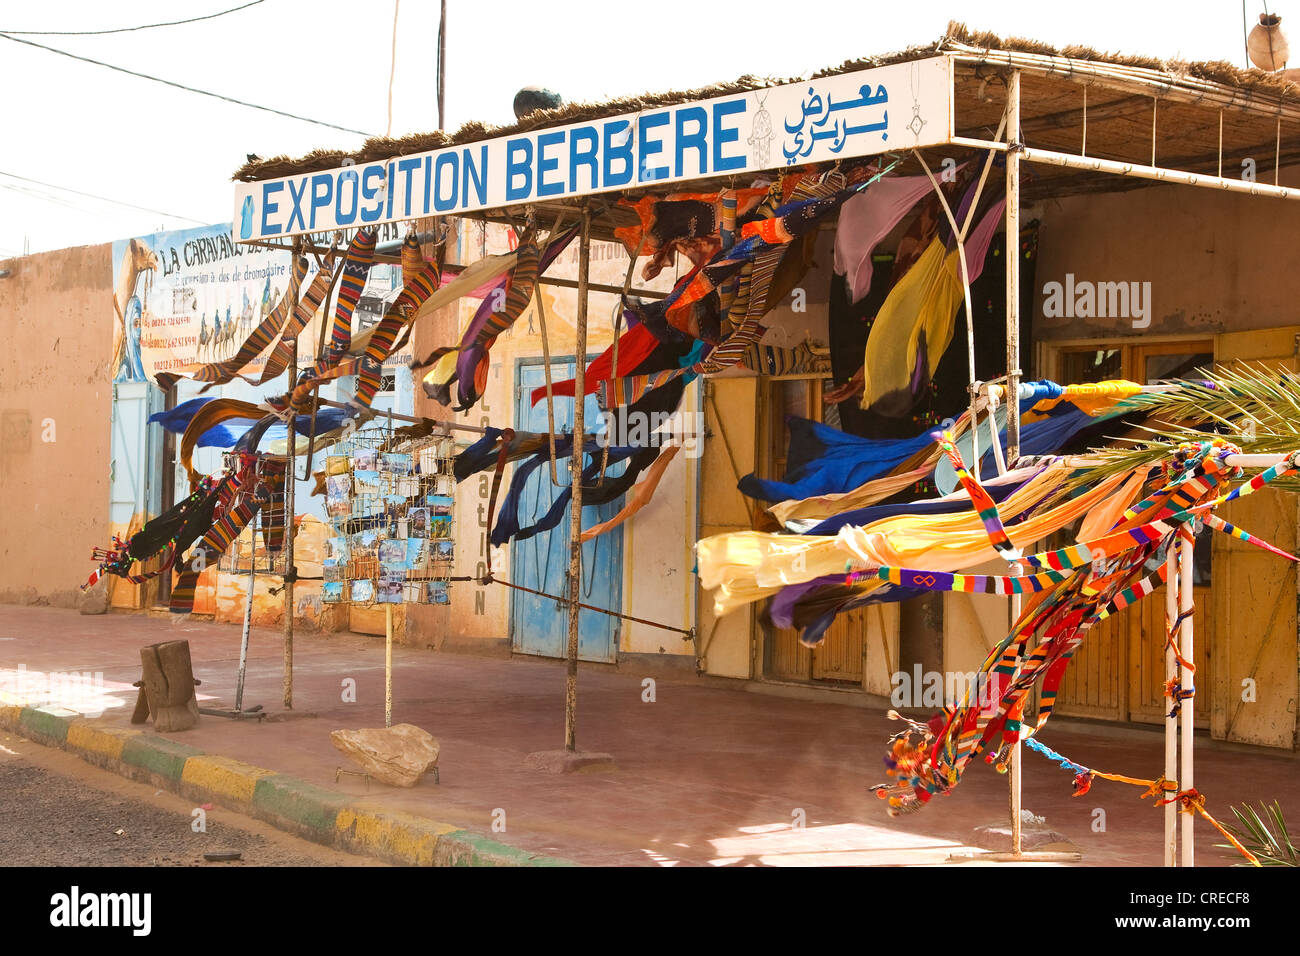 Desert wind, moderate sand storm at a souvenir shop selling Berber products on the edge of the Sahara desert in , Morocco Stock Photo